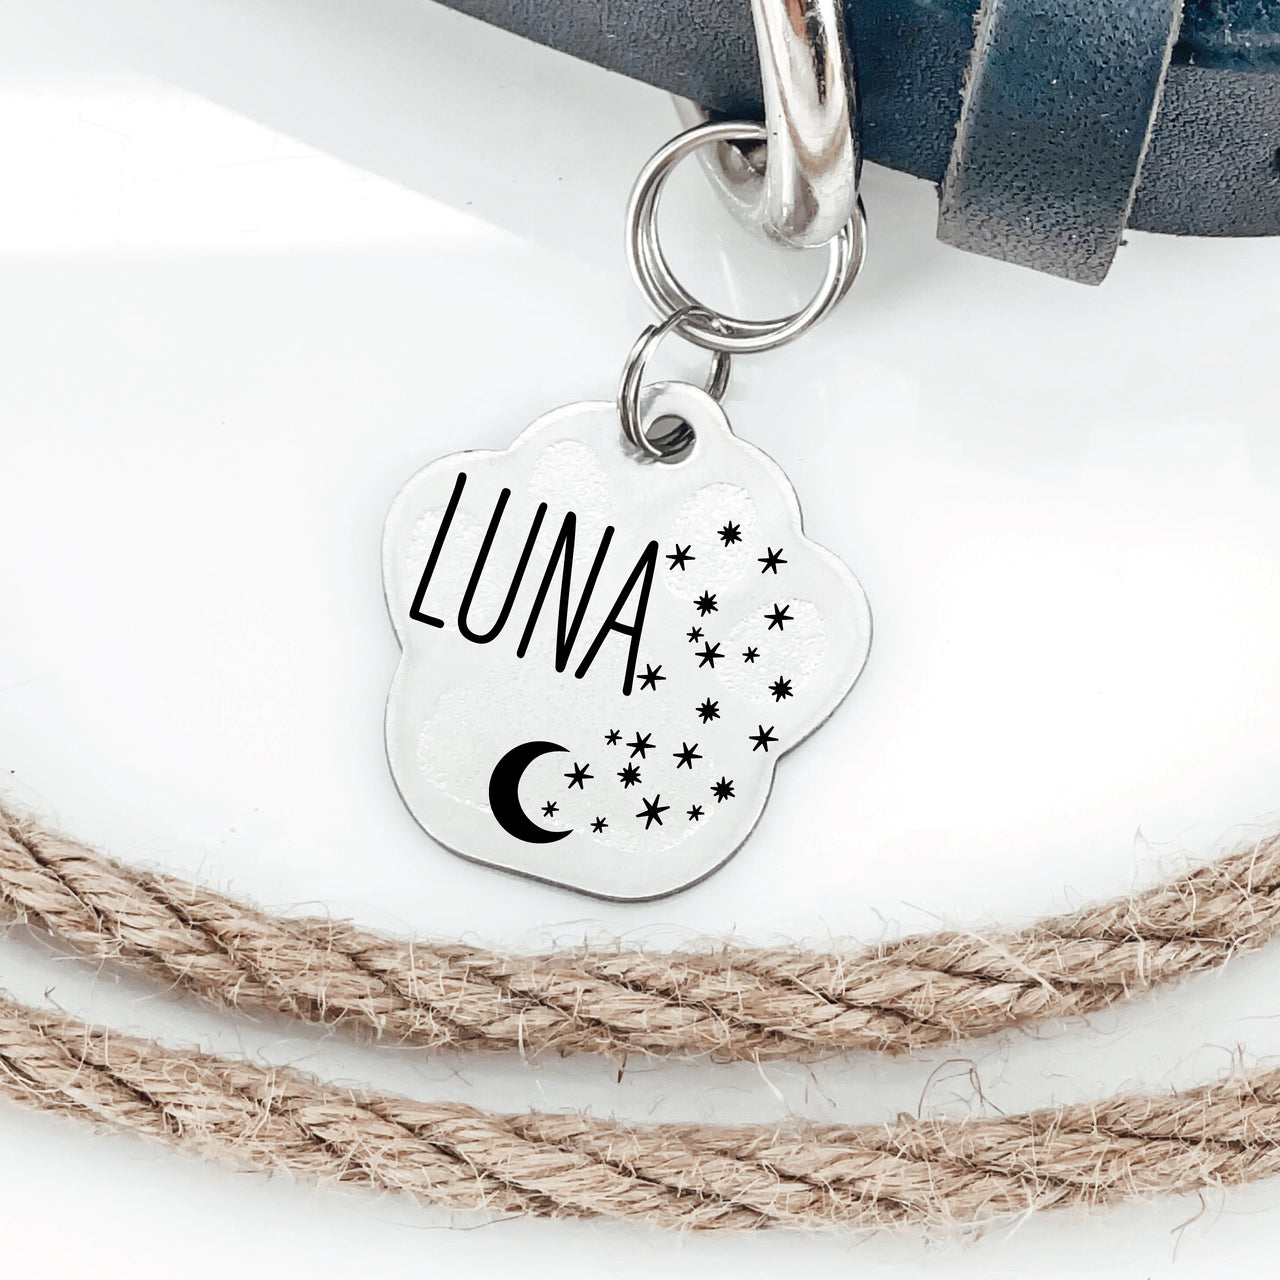 Silver pawprint shaped pet tag joined to collar by two jump rings. Tag has stars, a moon and animal name engraved on it.